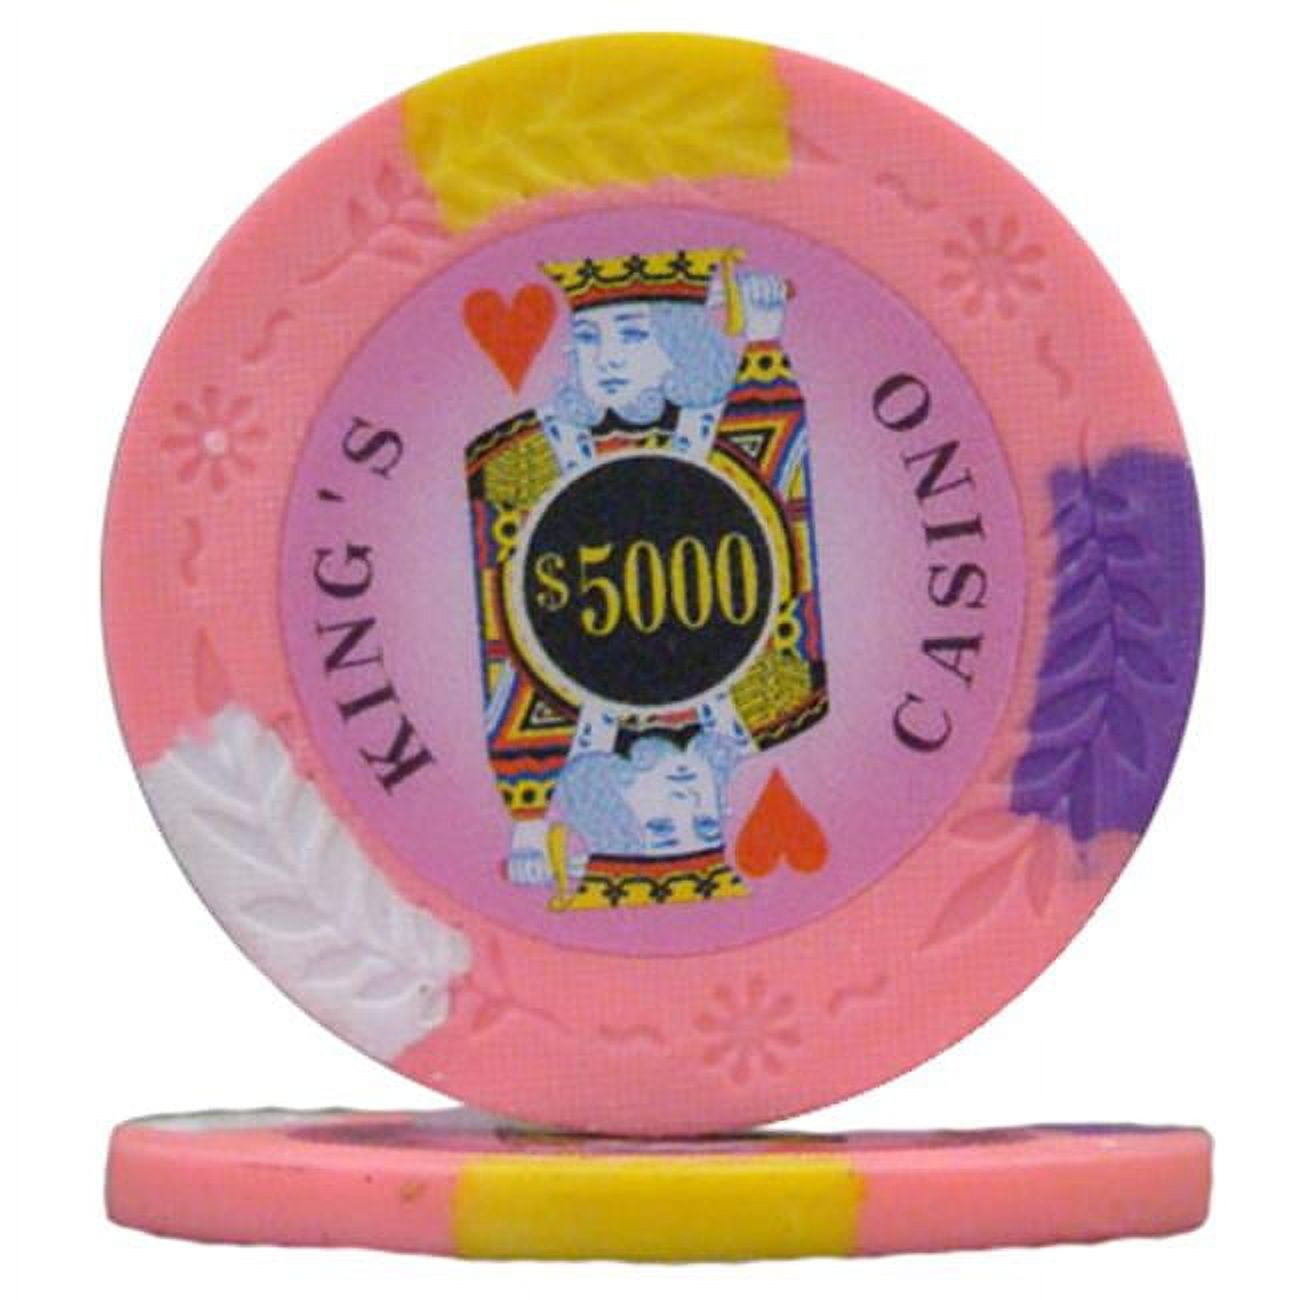 Cpkc-5000-25 14 G Kings Casino Pro Clay - Dollar 5000, Roll Of 25